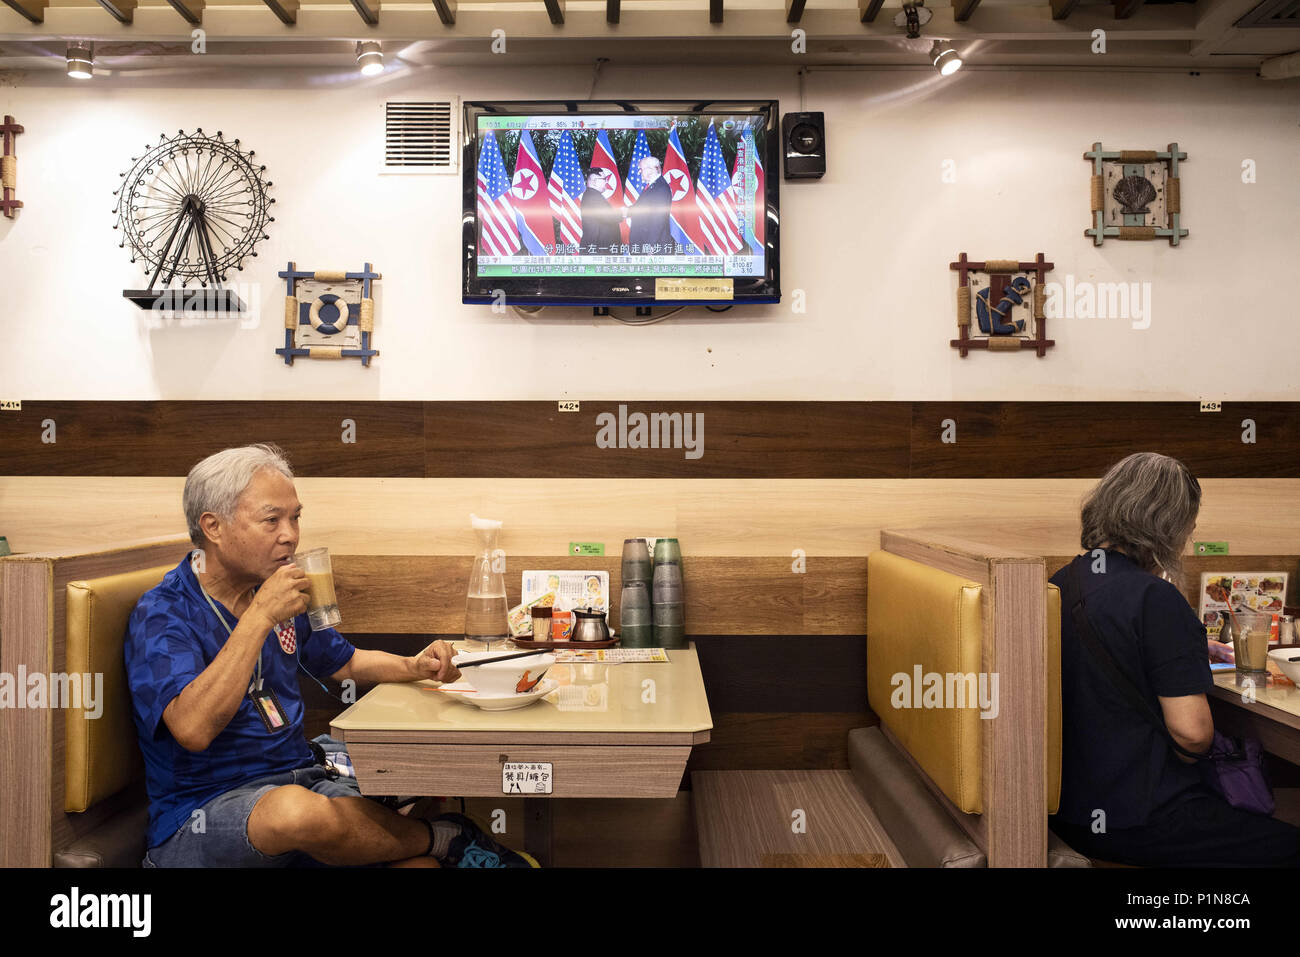 Kowloon, Hong Kong. 12th June, 2018. At a local restaurant in Hong Kong, a local watches a TV screen showing the historic moment when US President Donald Trump and North Korea leader Kim Jong-un meet for the first time during the Singapore peace-keeping and denuclearisation Summit. Credit: Miguel Candela/SOPA Images/ZUMA Wire/Alamy Live News Stock Photo